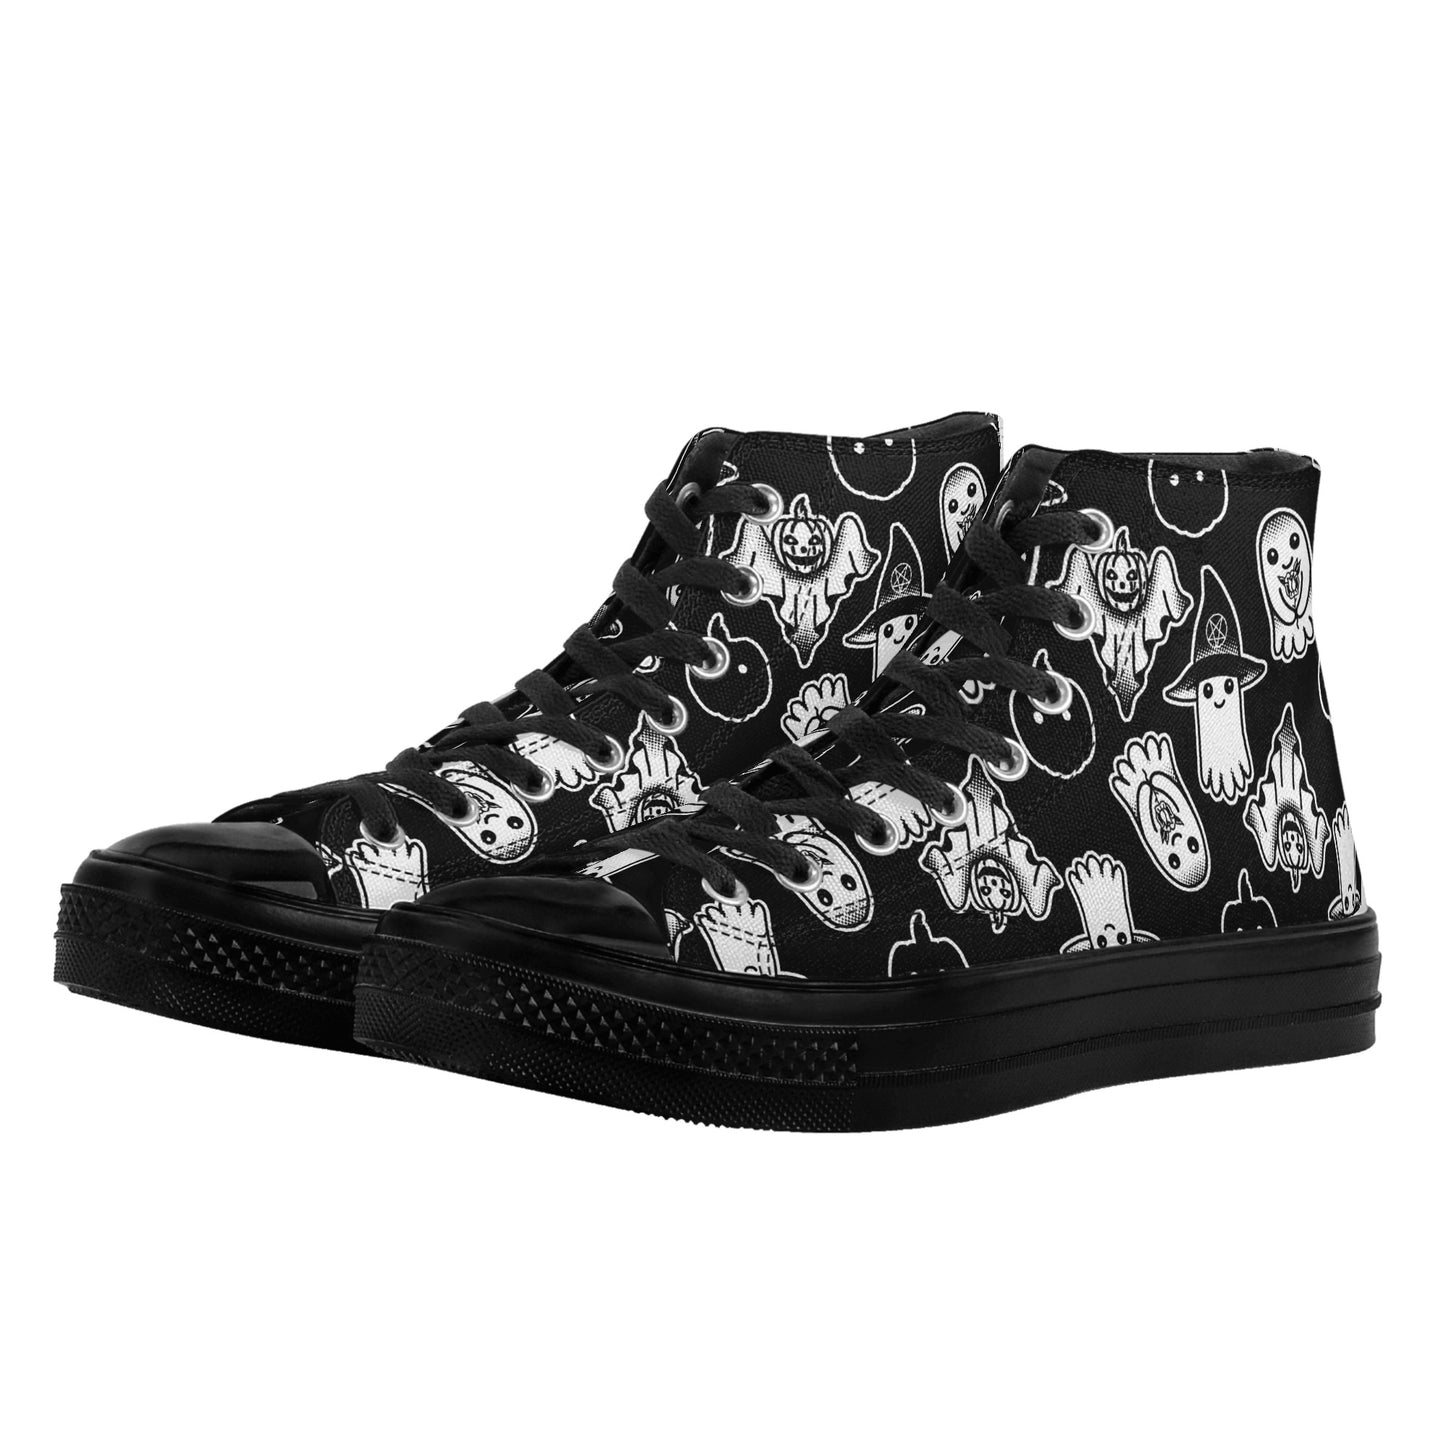 Spooky Ghosts High Top Canvas Shoes